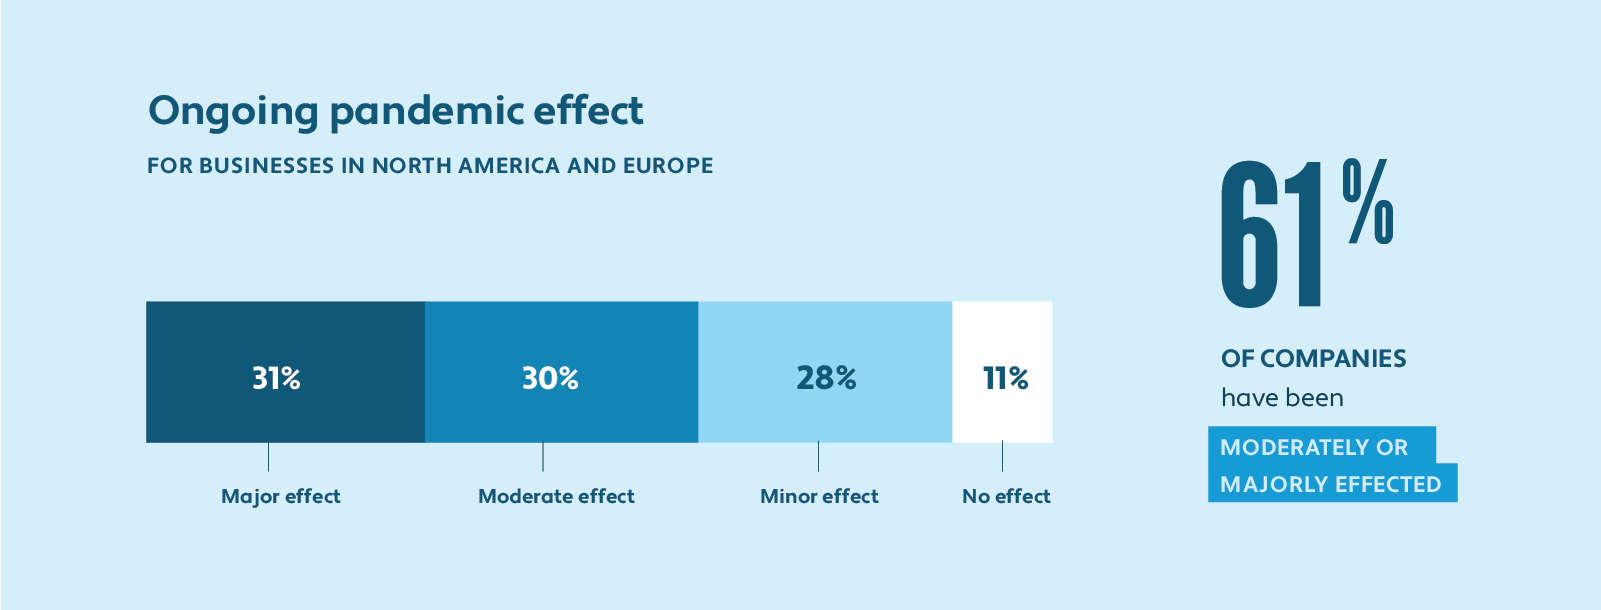 Chart showing the impact of the pandemic on survey respondents. Minor 28%, Moderate 30%, Major 31%, No effect 11%